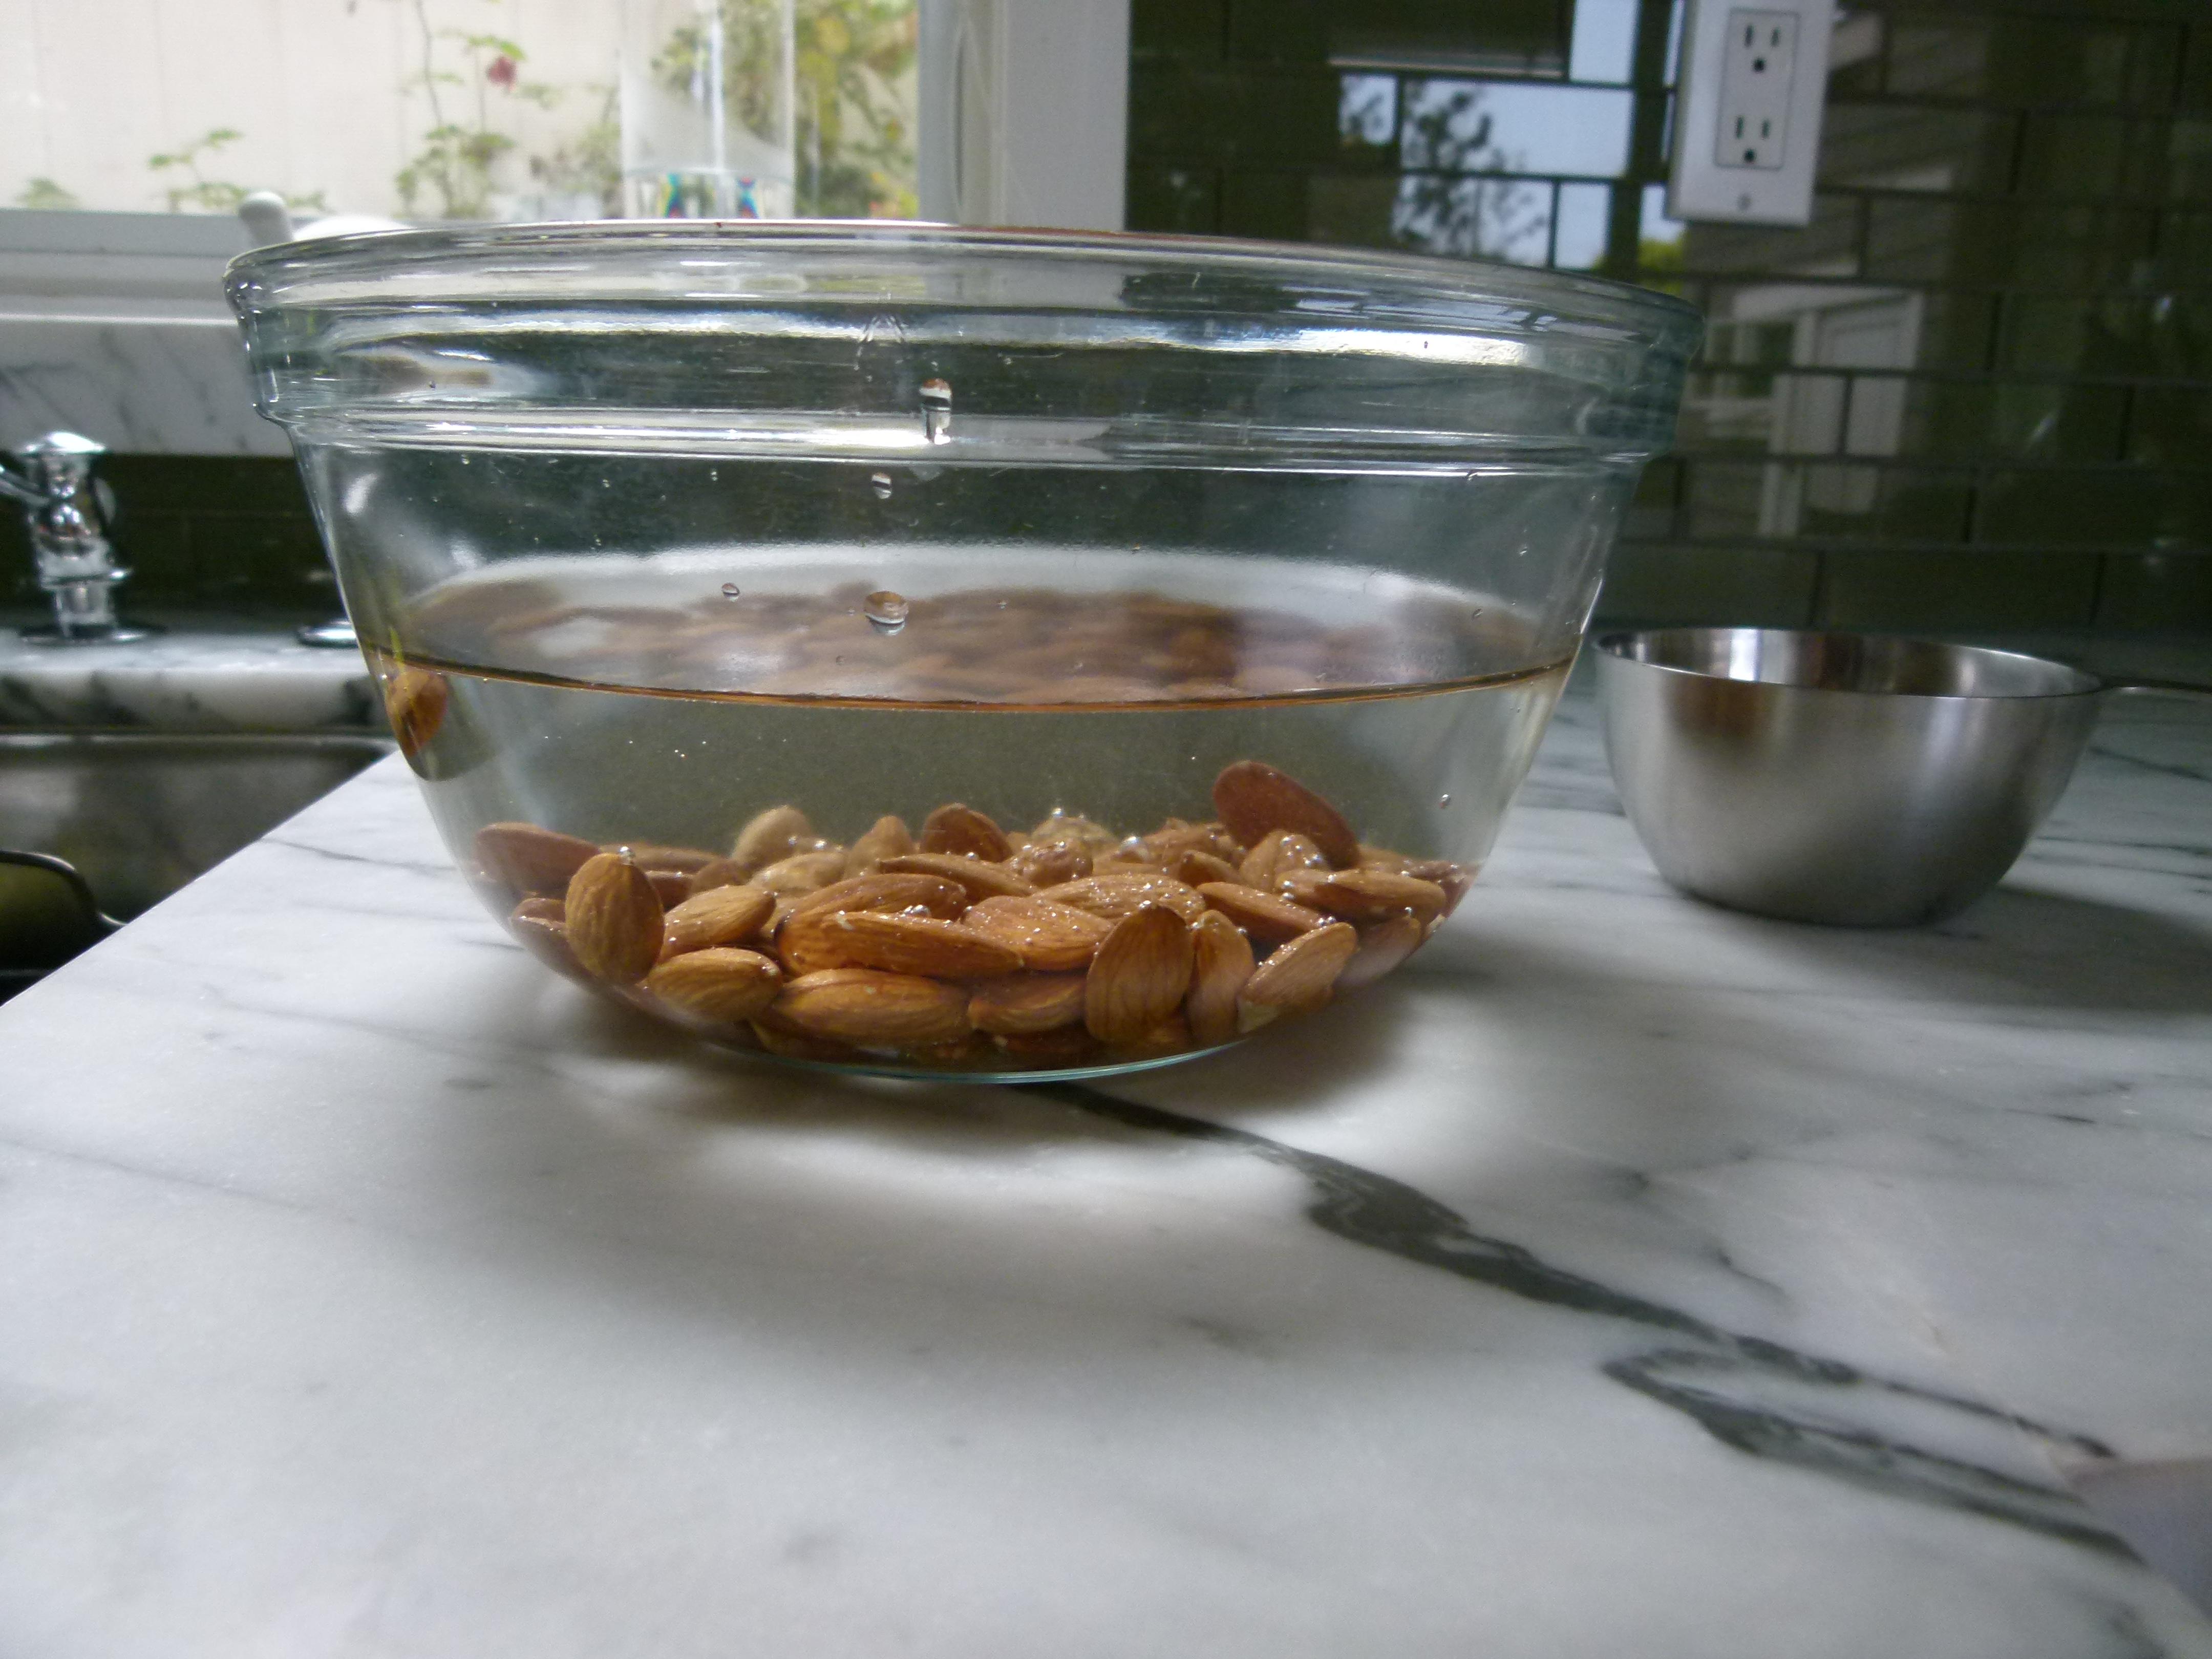 Soaking Nuts, How to Soak and Dehydrate Nuts